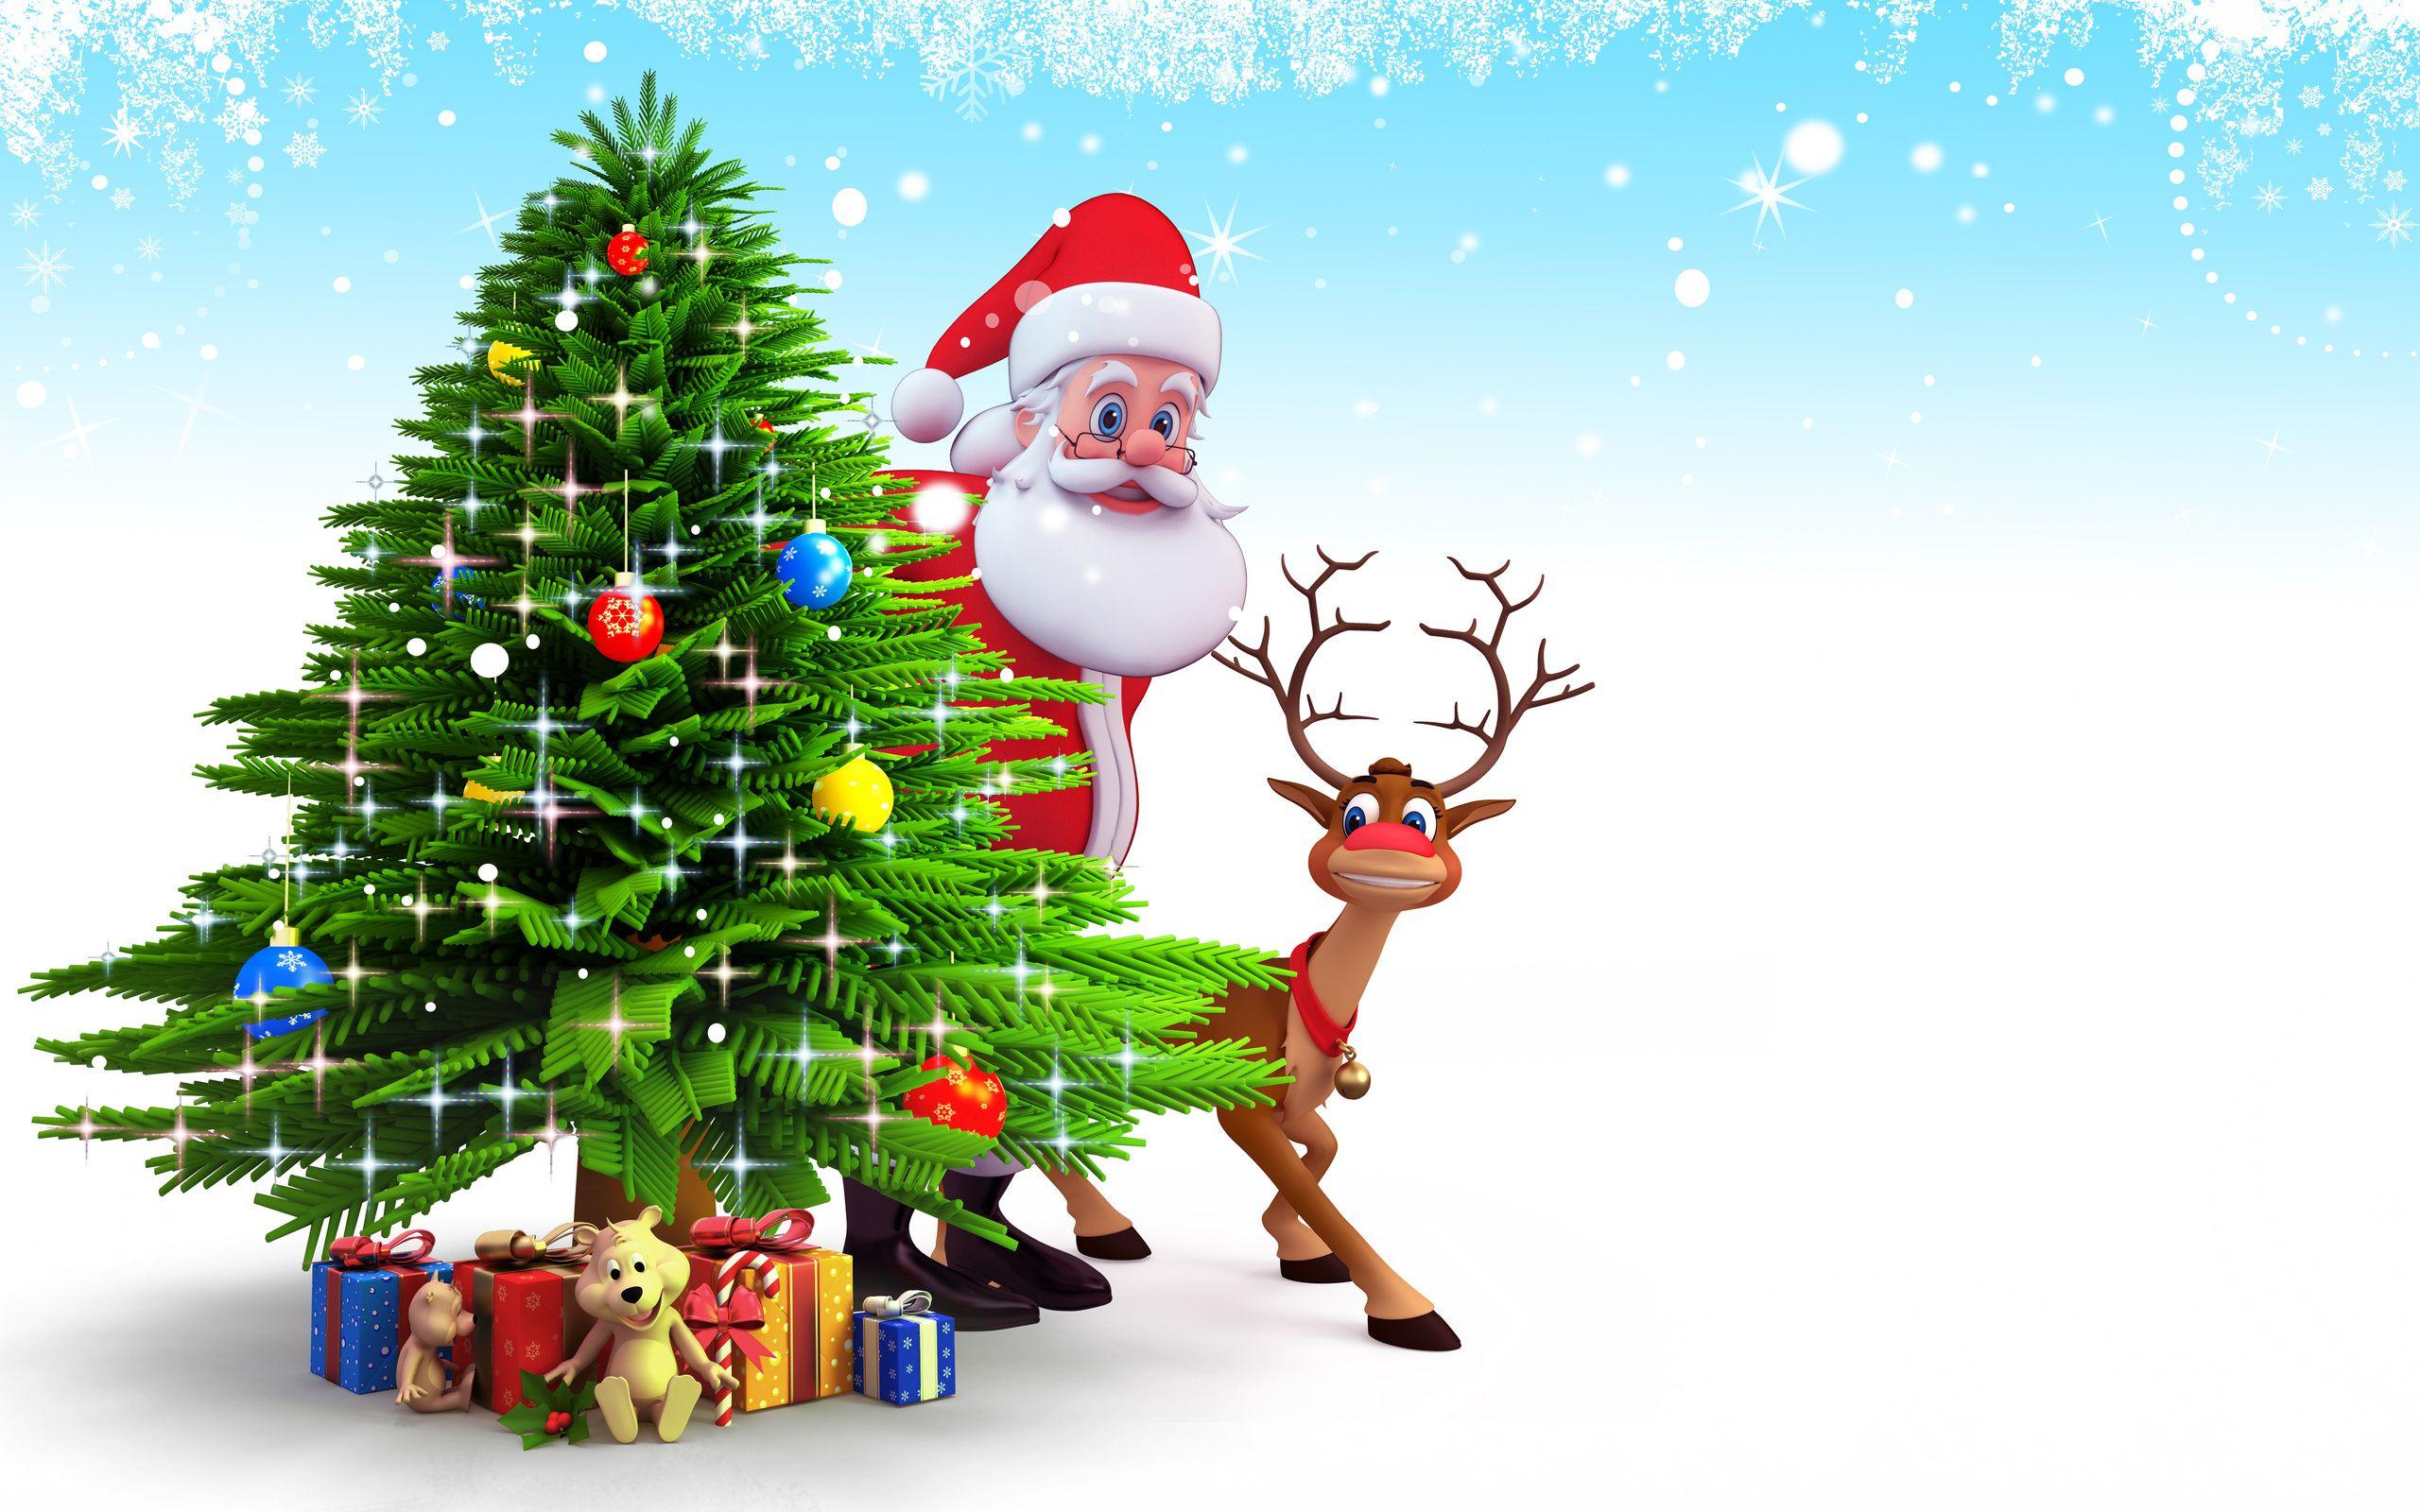 Cute cartoon wallpaper with Christmas 3D animation theme for kids and children faceb. Christmas wallpaper free, Merry christmas wallpaper, Merry christmas image